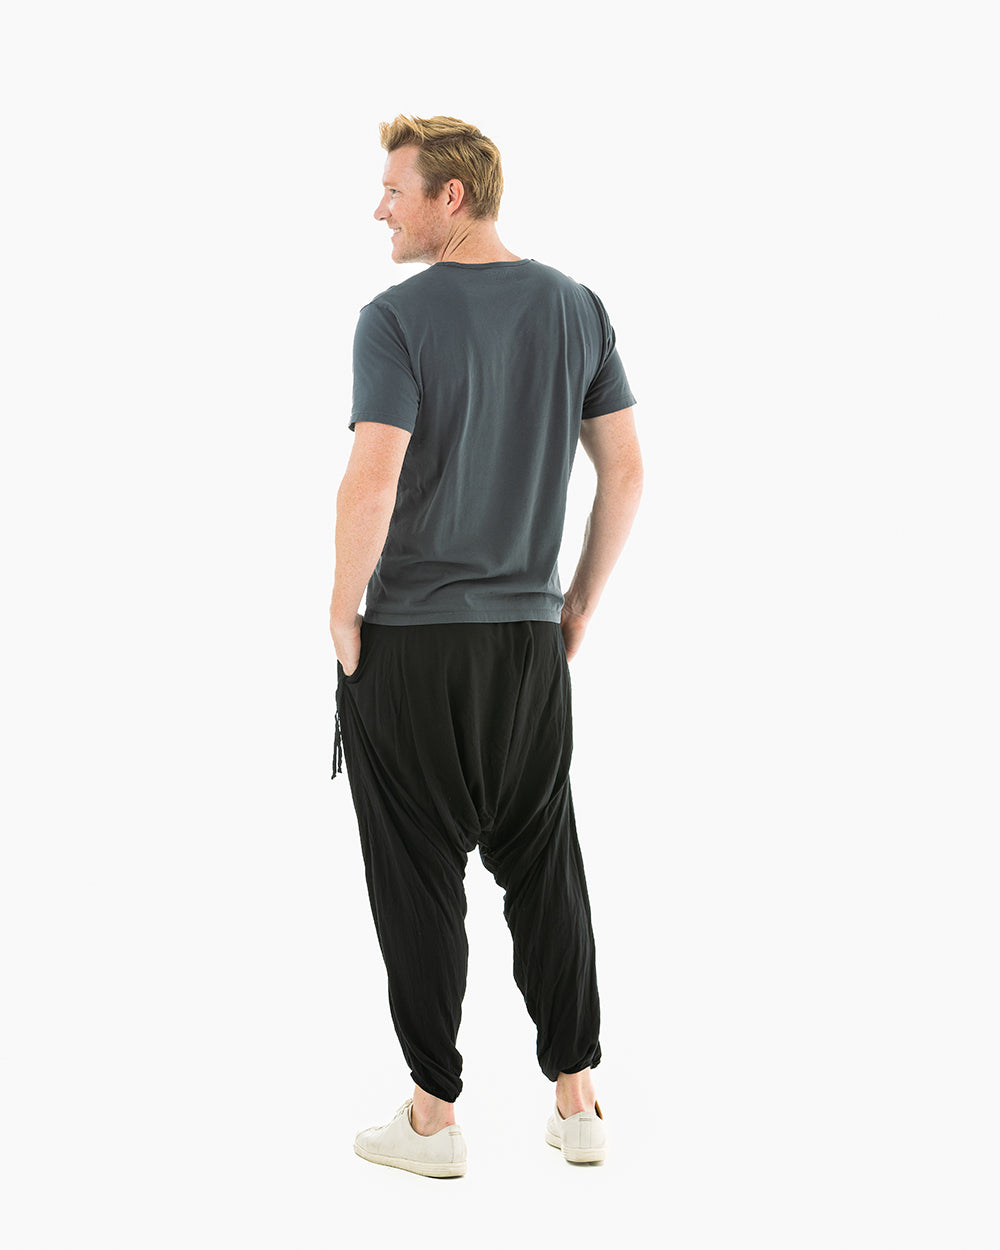 Mens Yoga Pants - The Most Comfortable Pants You'll Ever Own!